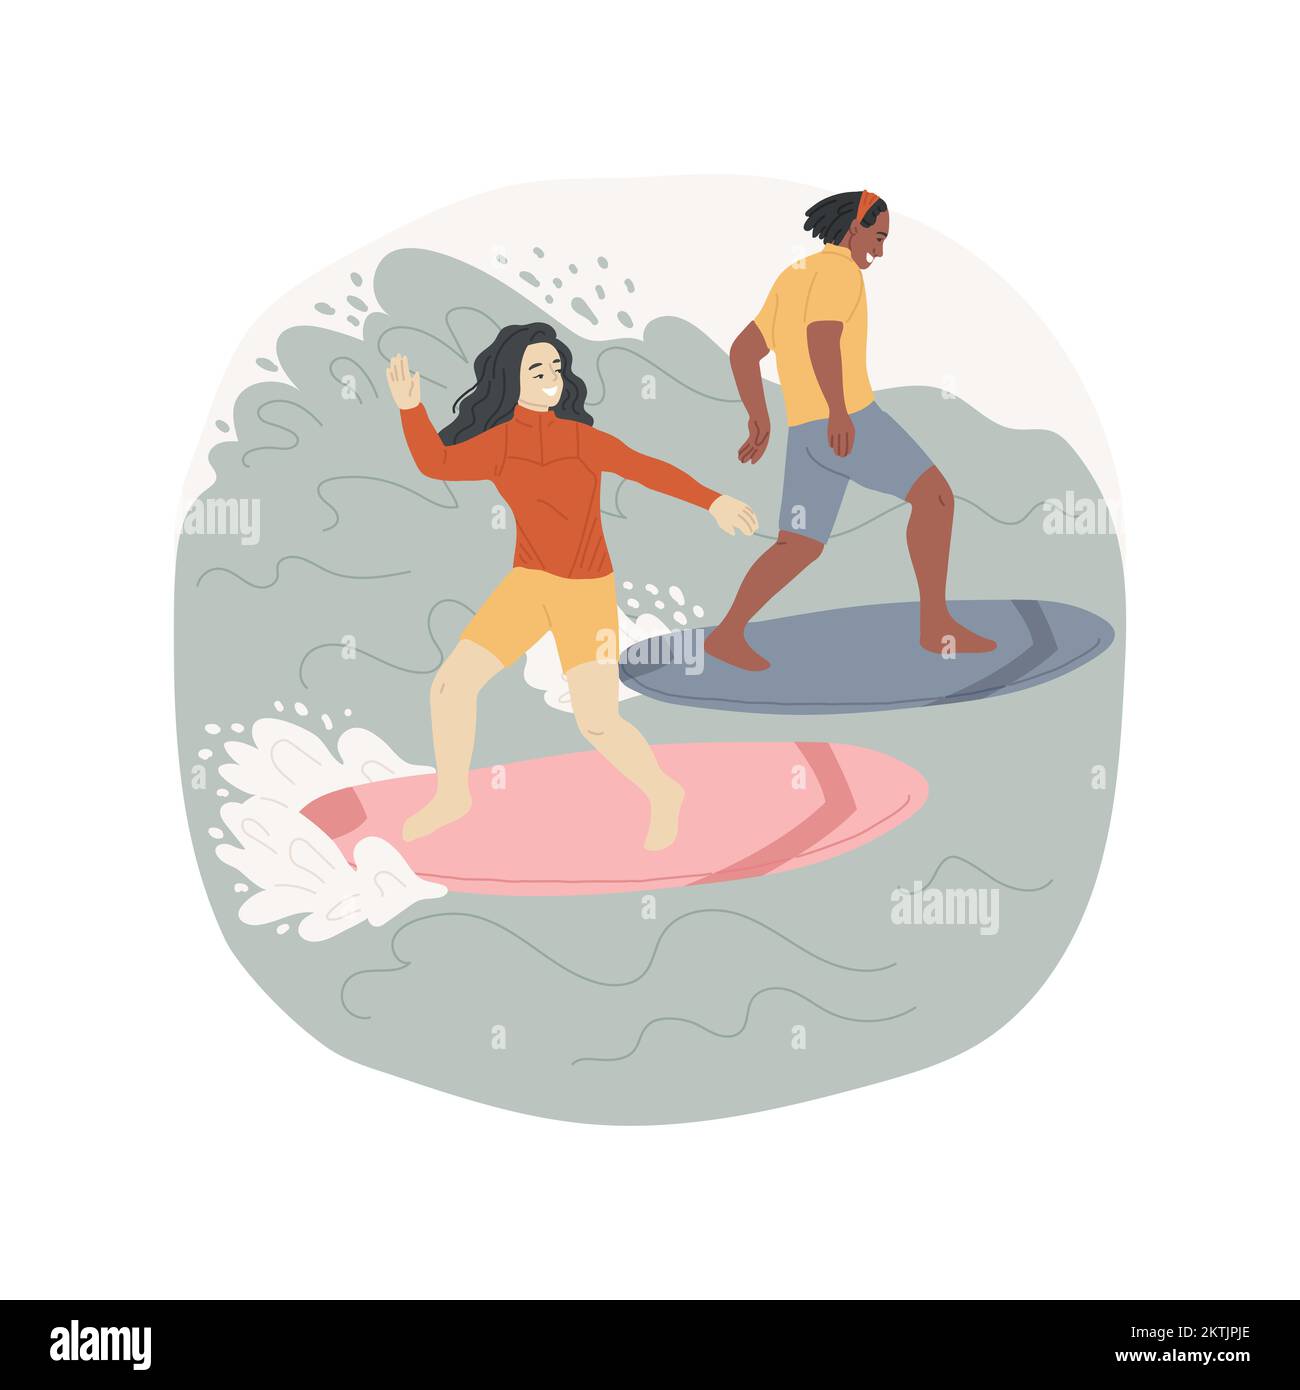 Surfing isolated cartoon vector illustration. Group of happy teenagers surfing together, extreme summer sport, active lifestyle, leisure time together, having fun on beach vector cartoon. Stock Vector